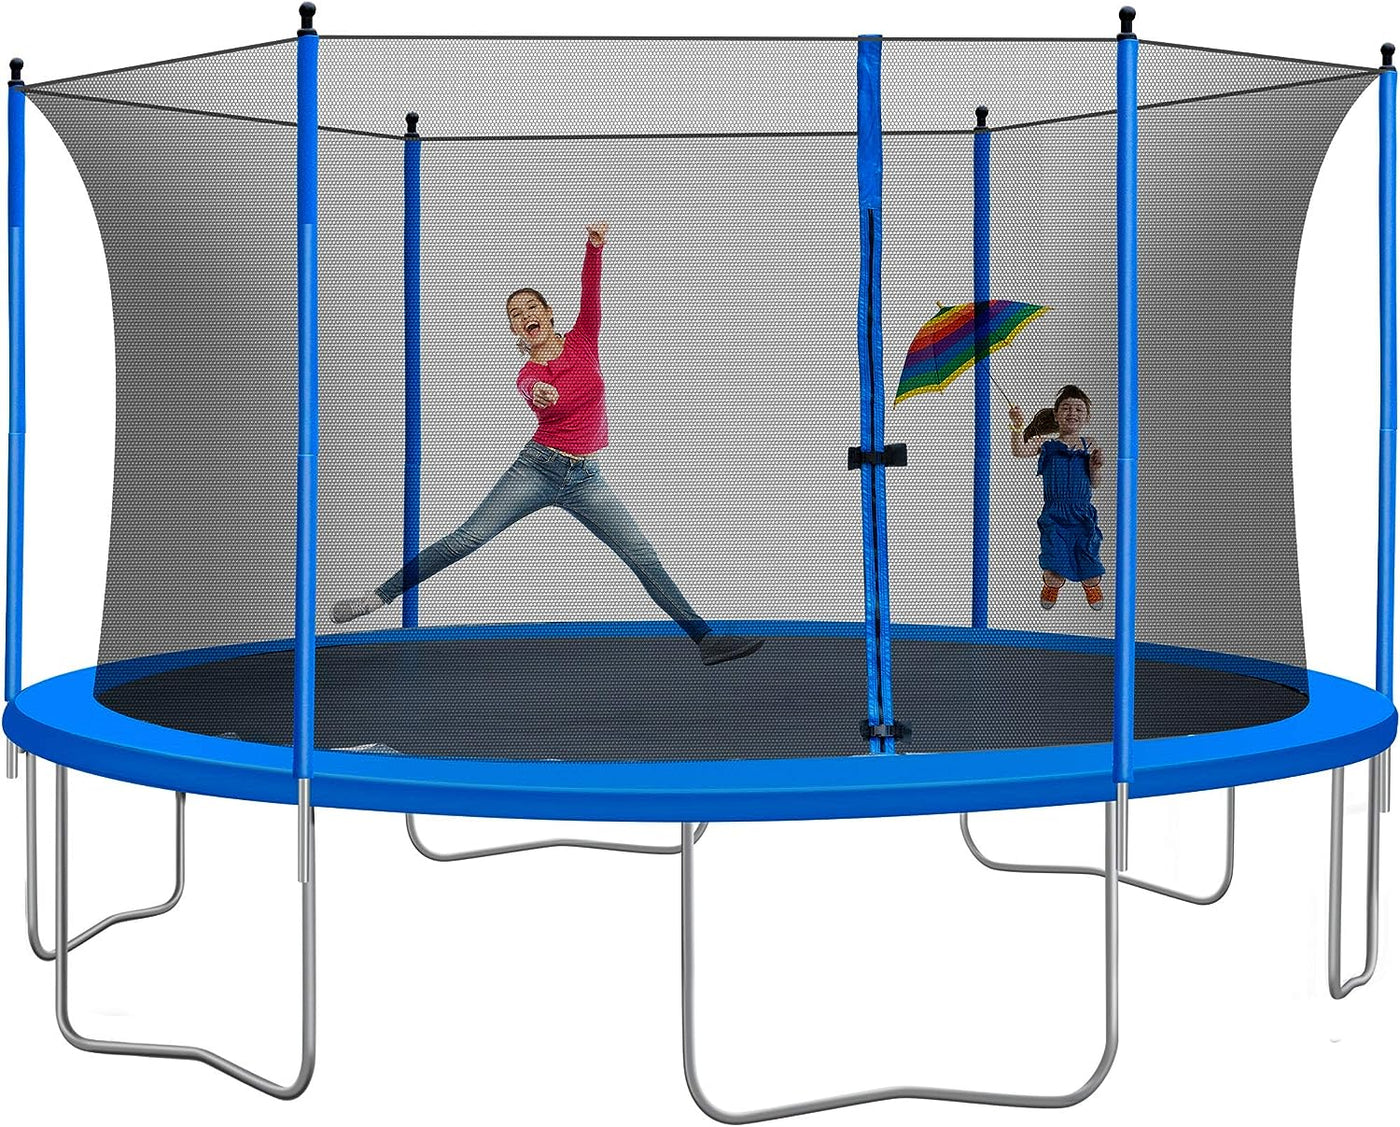 steelway 1500 LBS 16FT Trampoline with Safety Enclosure Net - $260